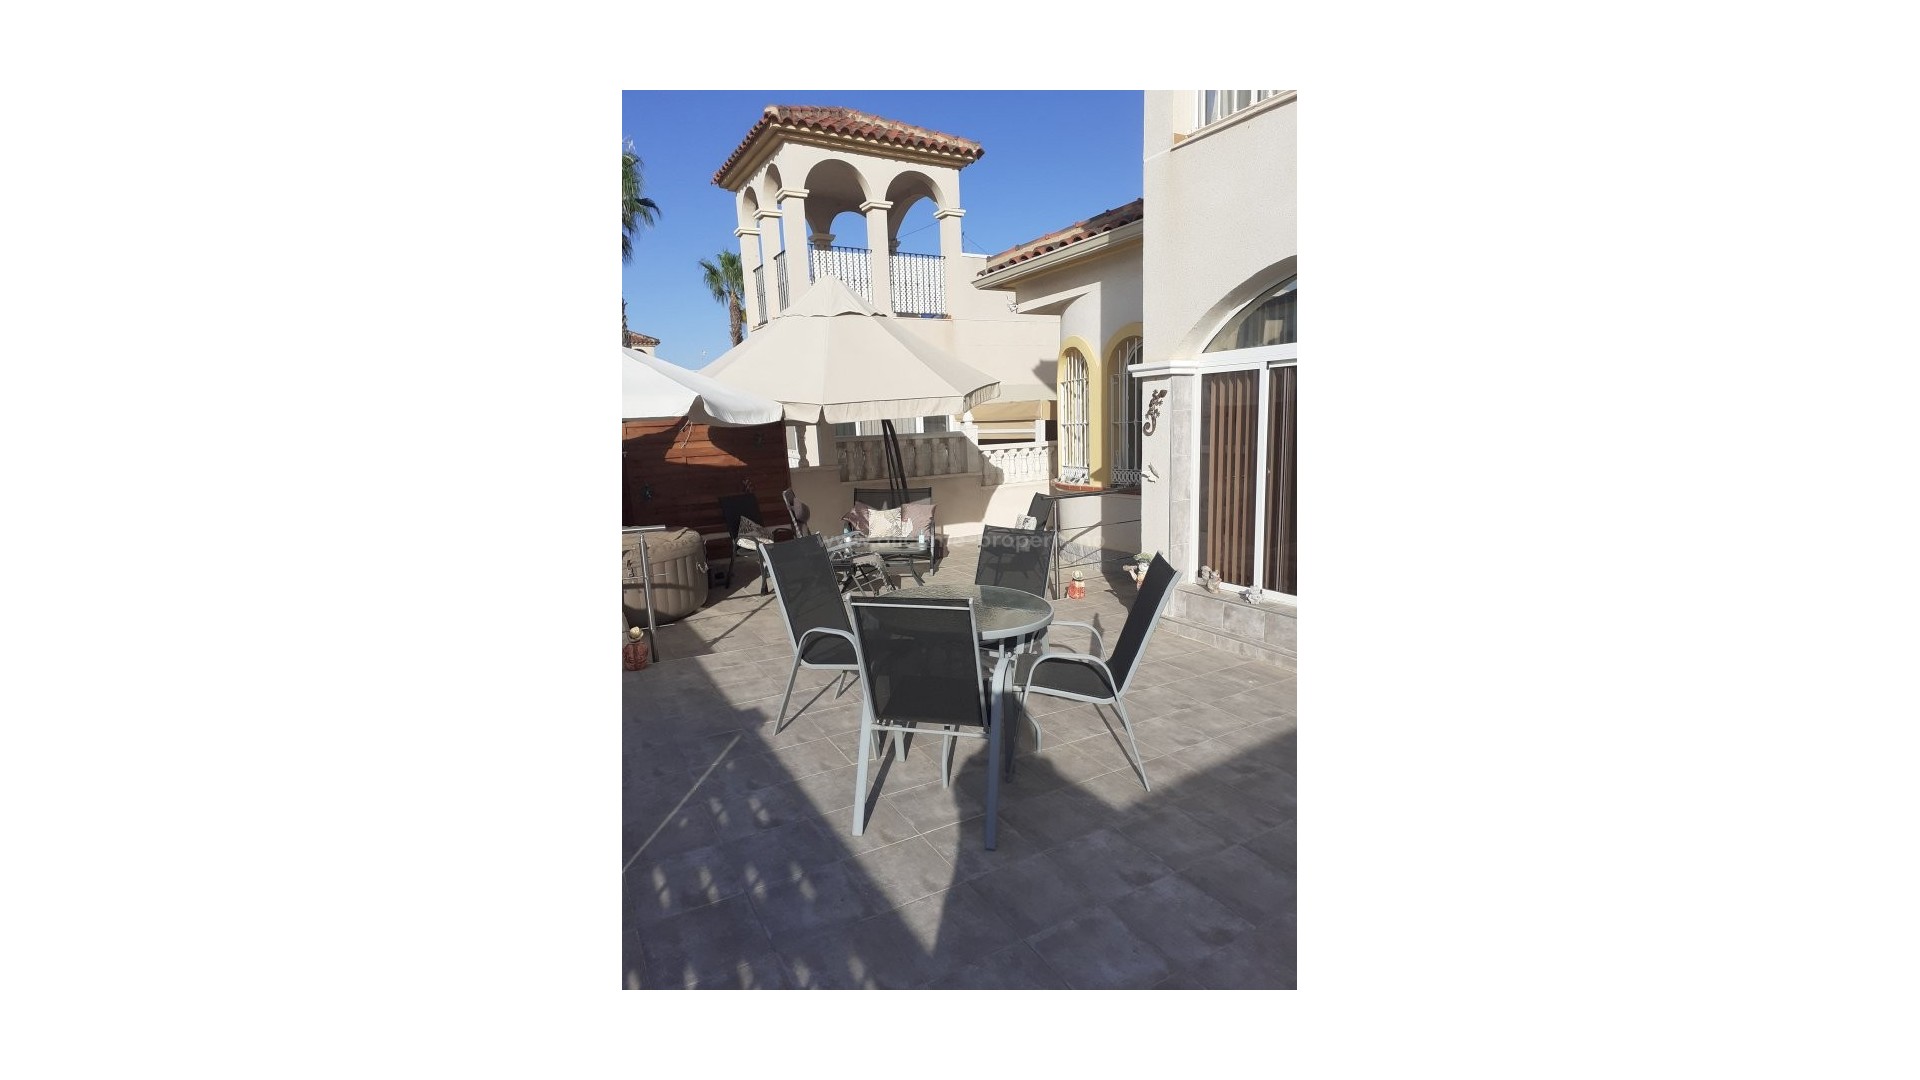 Equity release in Spain, home/bungalow in Rojales, Alicante, 2/3 bedrooms, 1 bathroom, garden and 2 patios, hot tub, solarium, communal pool, 15min to beach